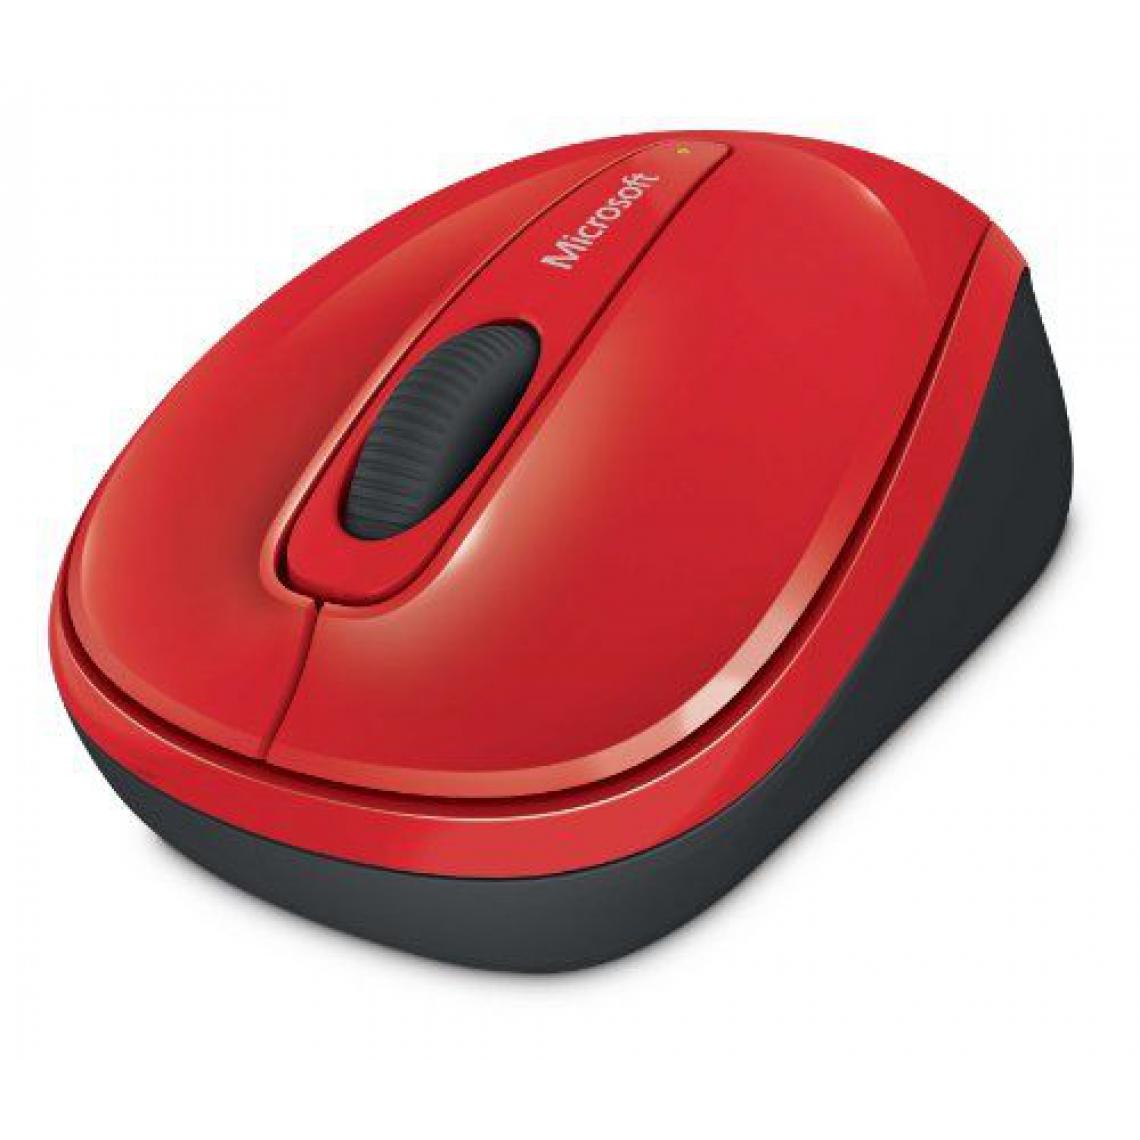 Microsoft - Wireless Mobile Mouse 3500 - flame red gloss - Souris